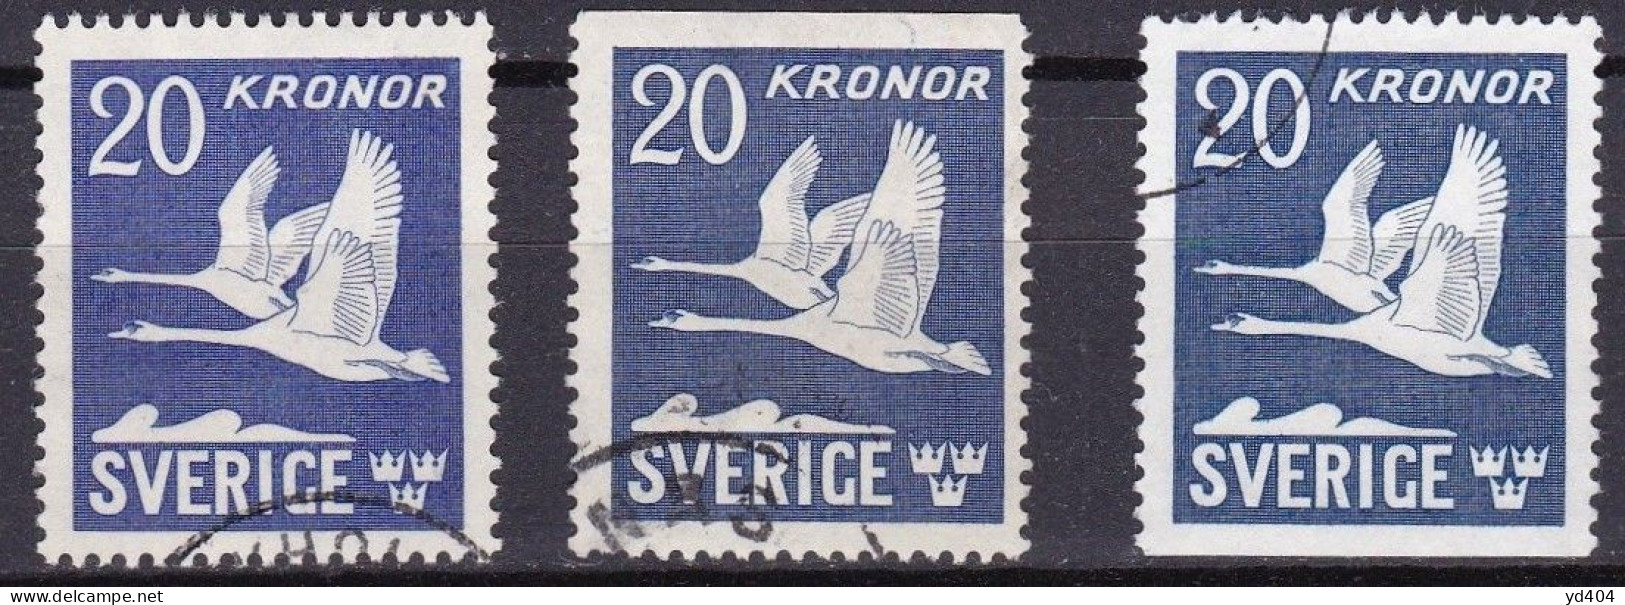 SE611 – SUEDE – SWEDEN – 1953 – SWAN FLIGHT – Y&T # 7/7a(x2) USED 19 € - Used Stamps